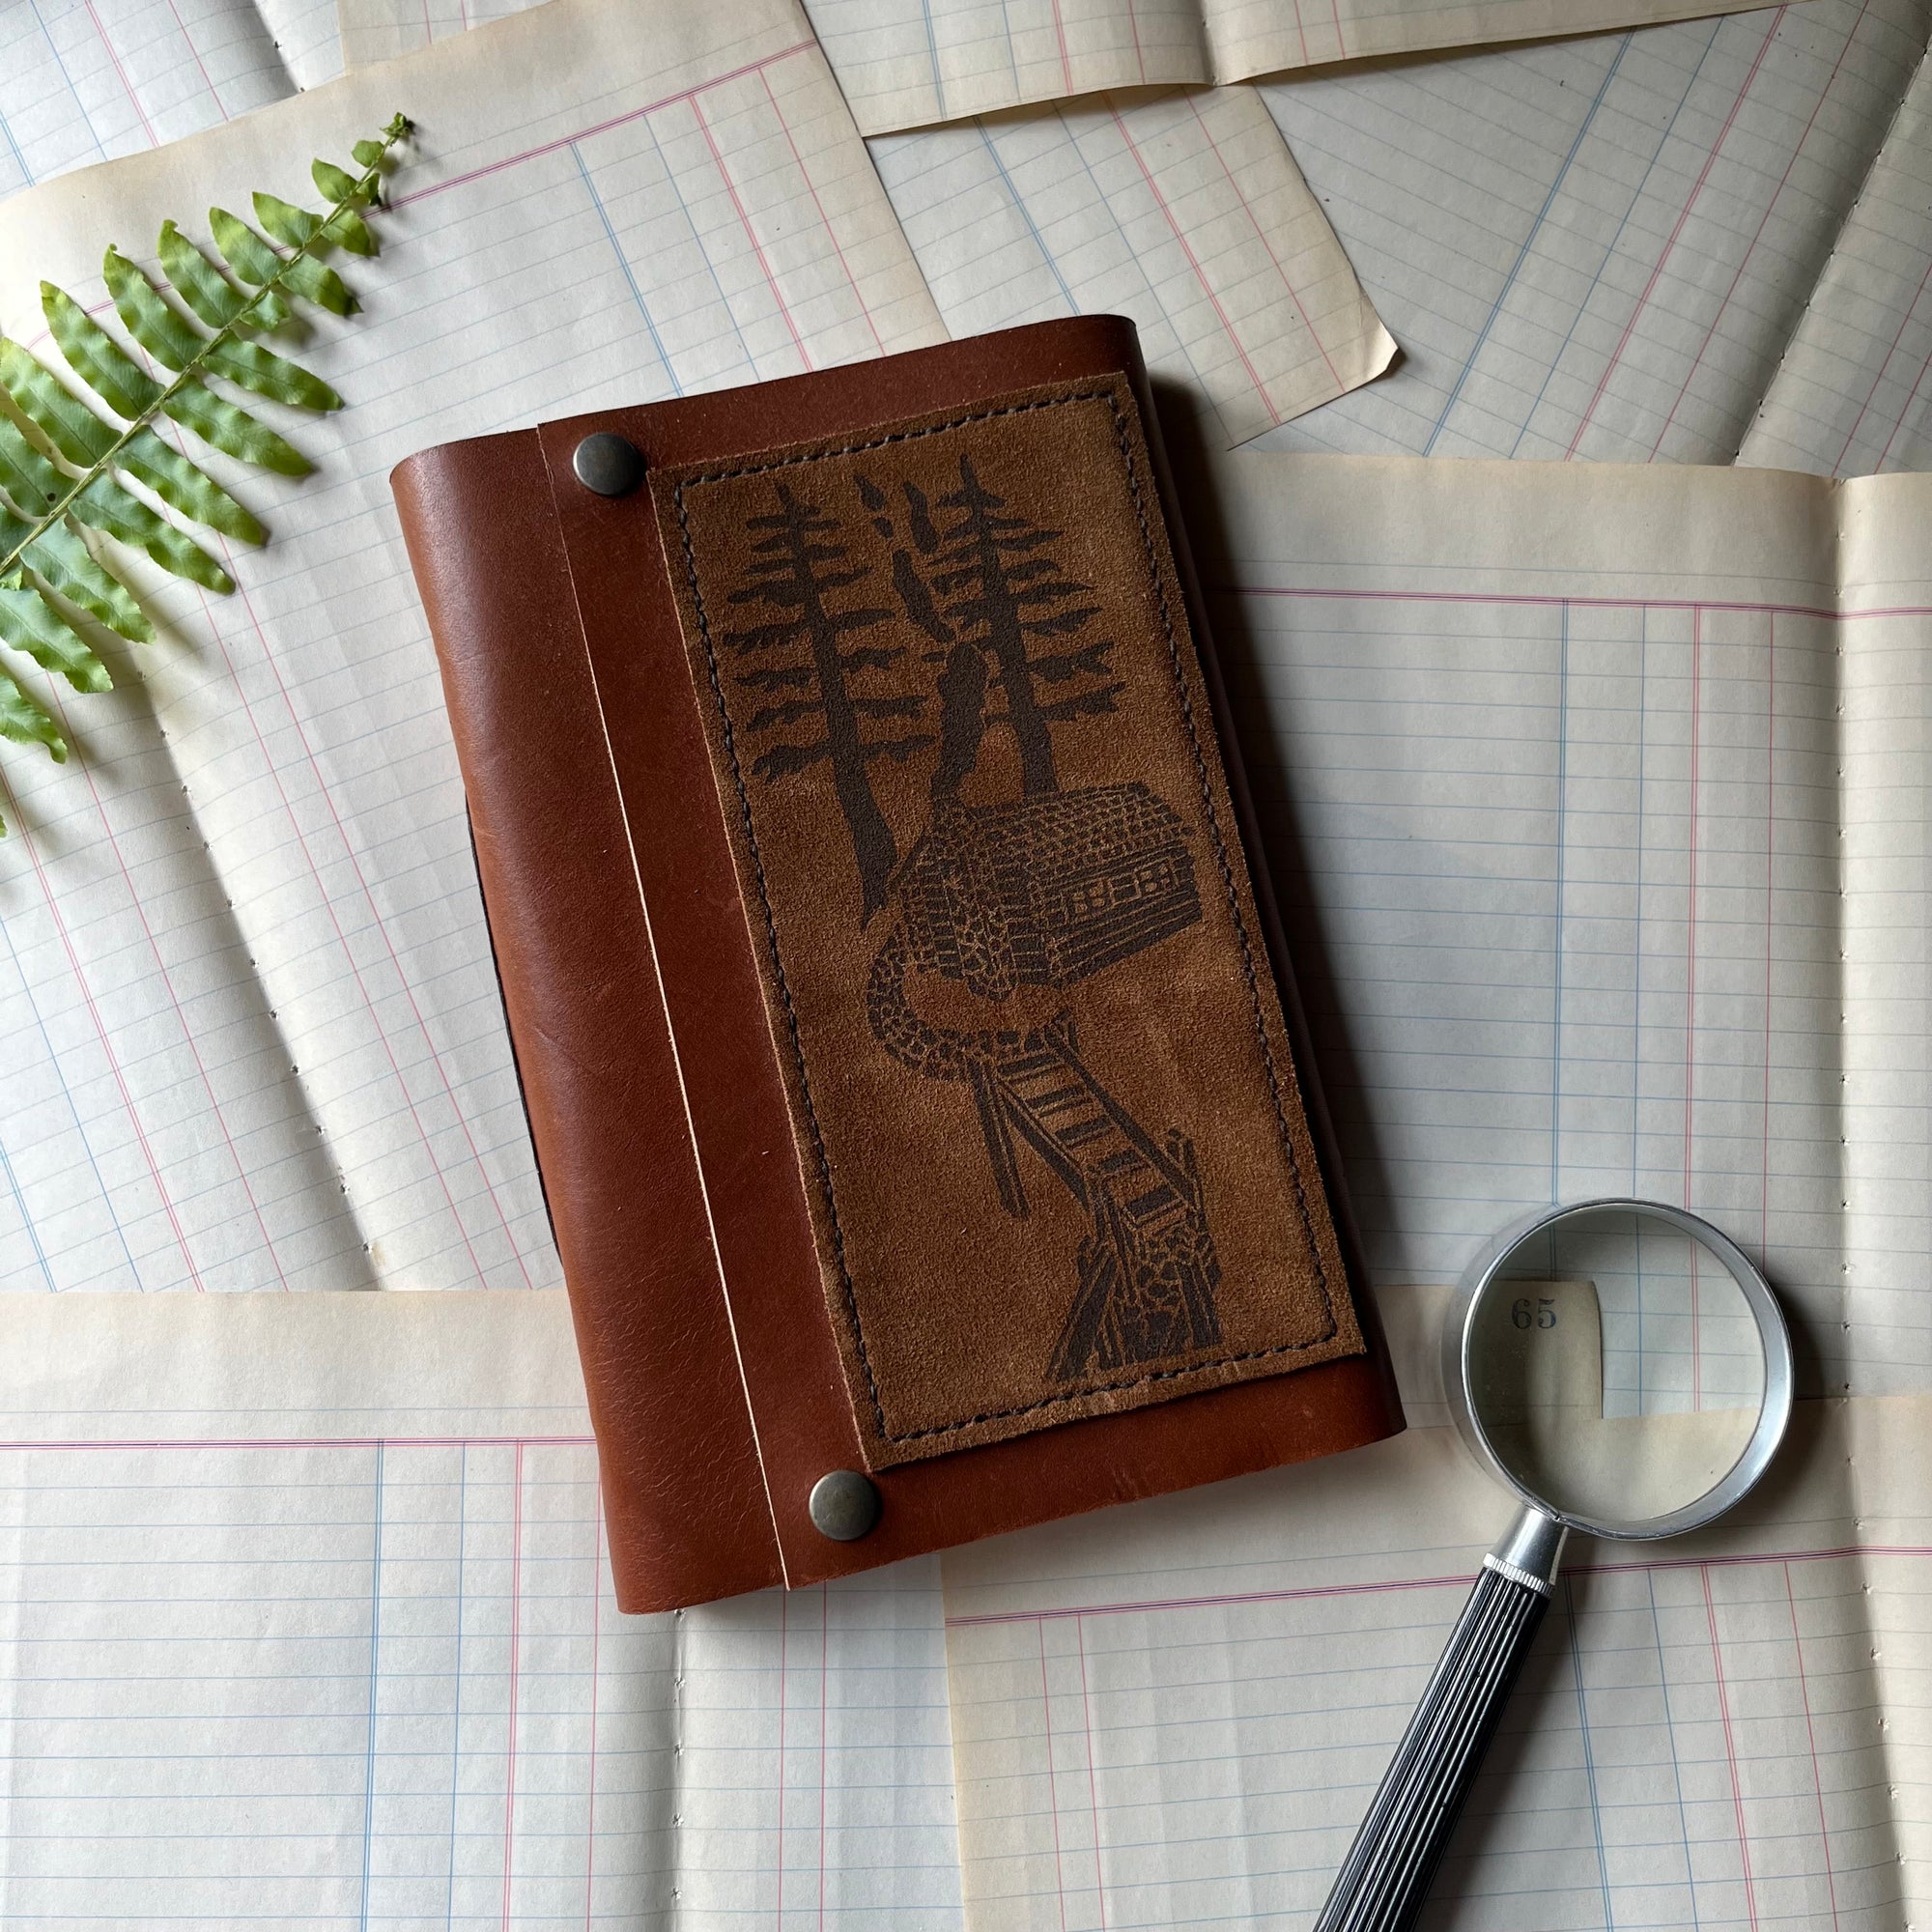 Log Cabin Leather Journal or Guest Book, nature, gratitude or book journal - blank journal - view of the front cover